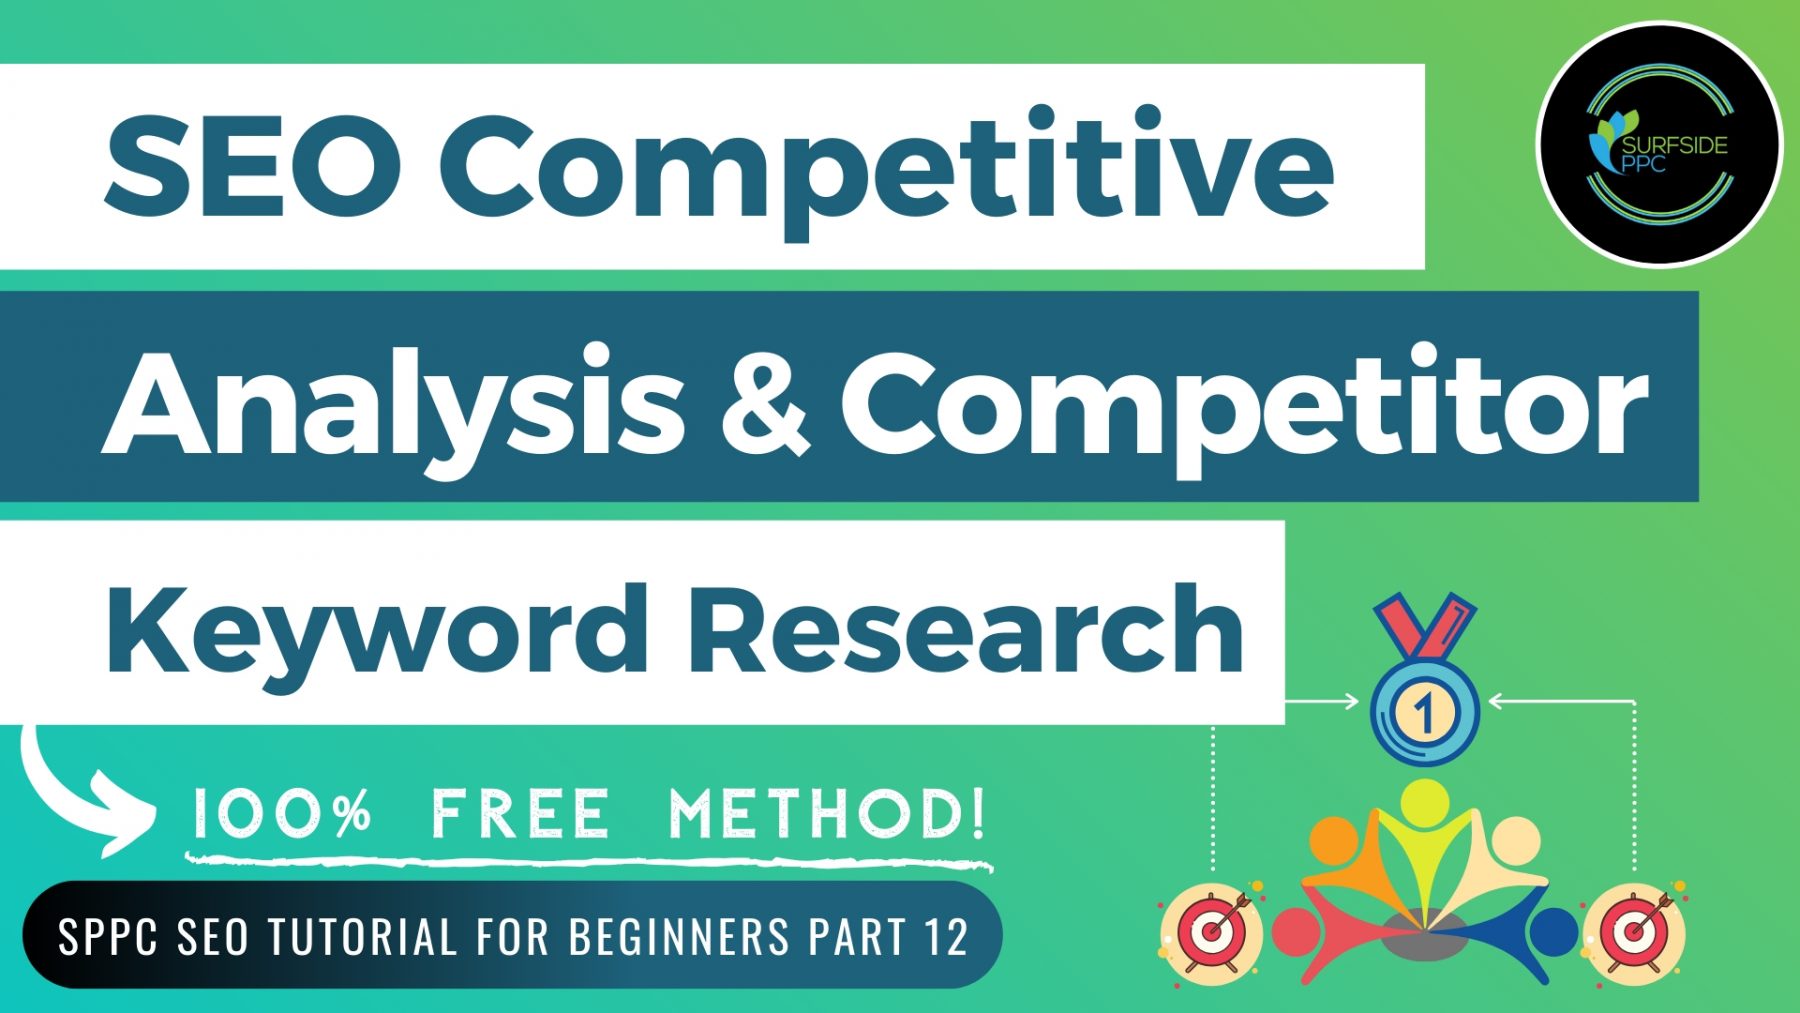 SEO Competitive Analysis & Competitor Keyword Research